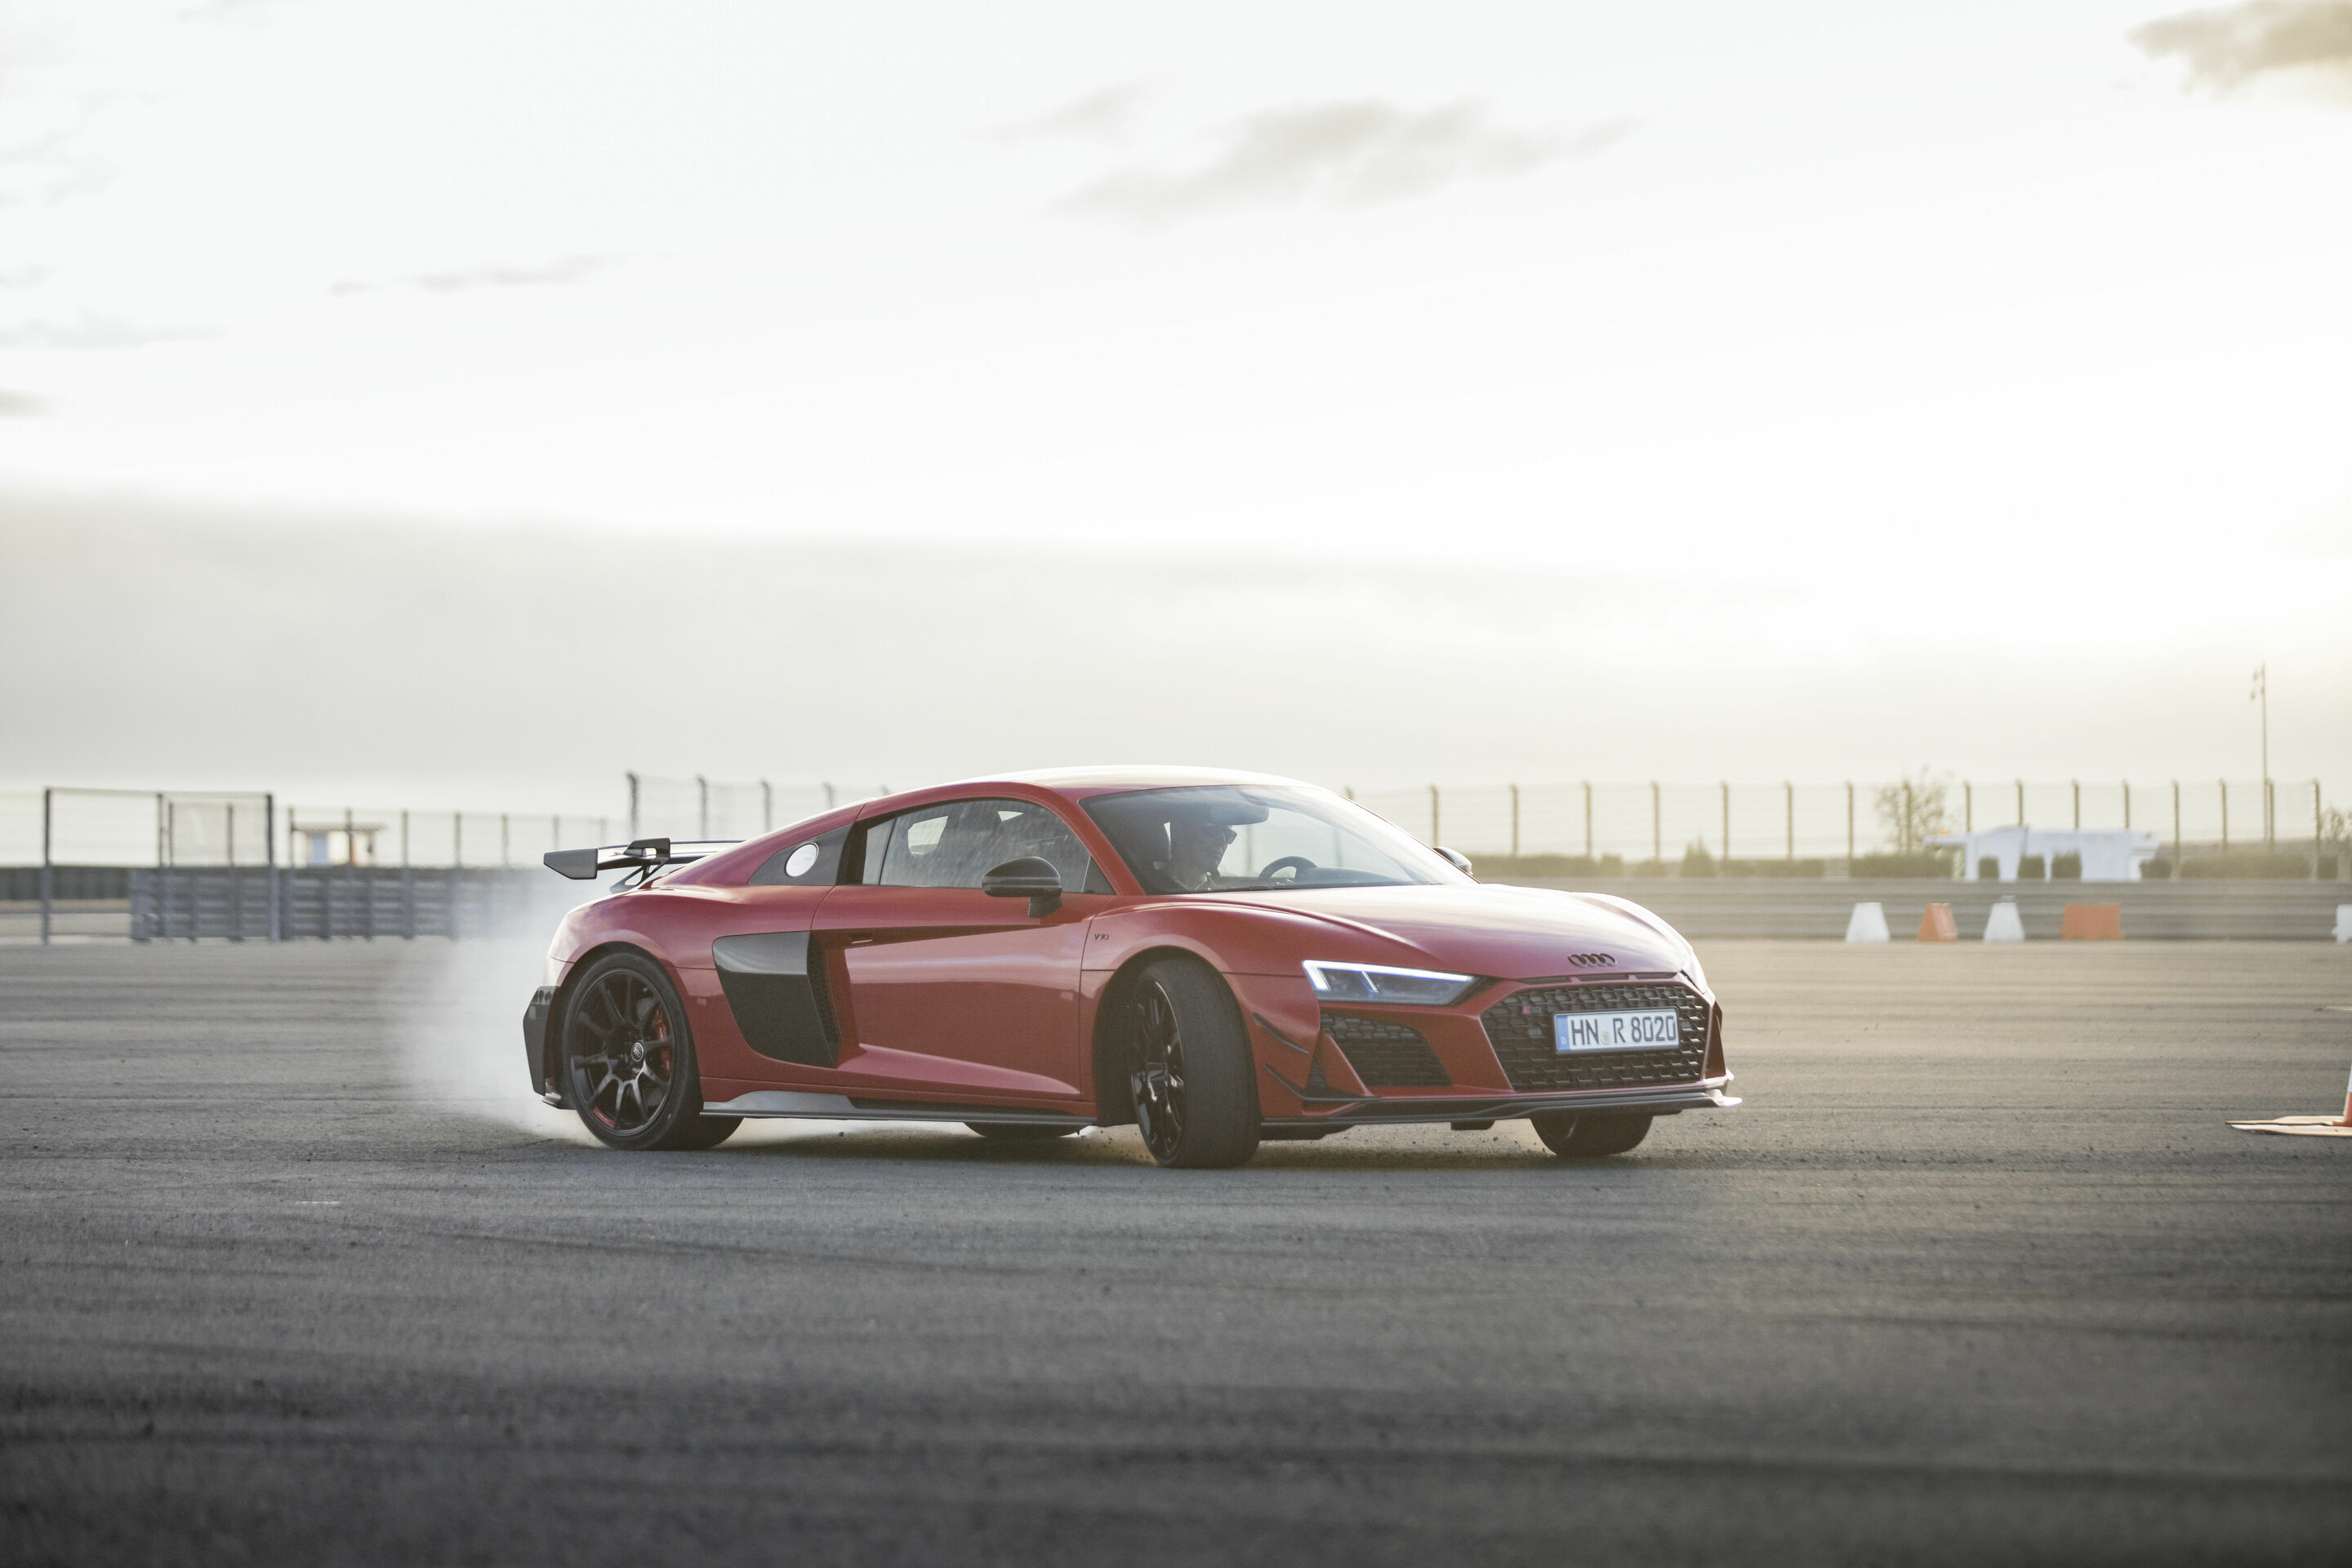 New Audi R8 V10 GT RWD unveiled as firm's most focused road car